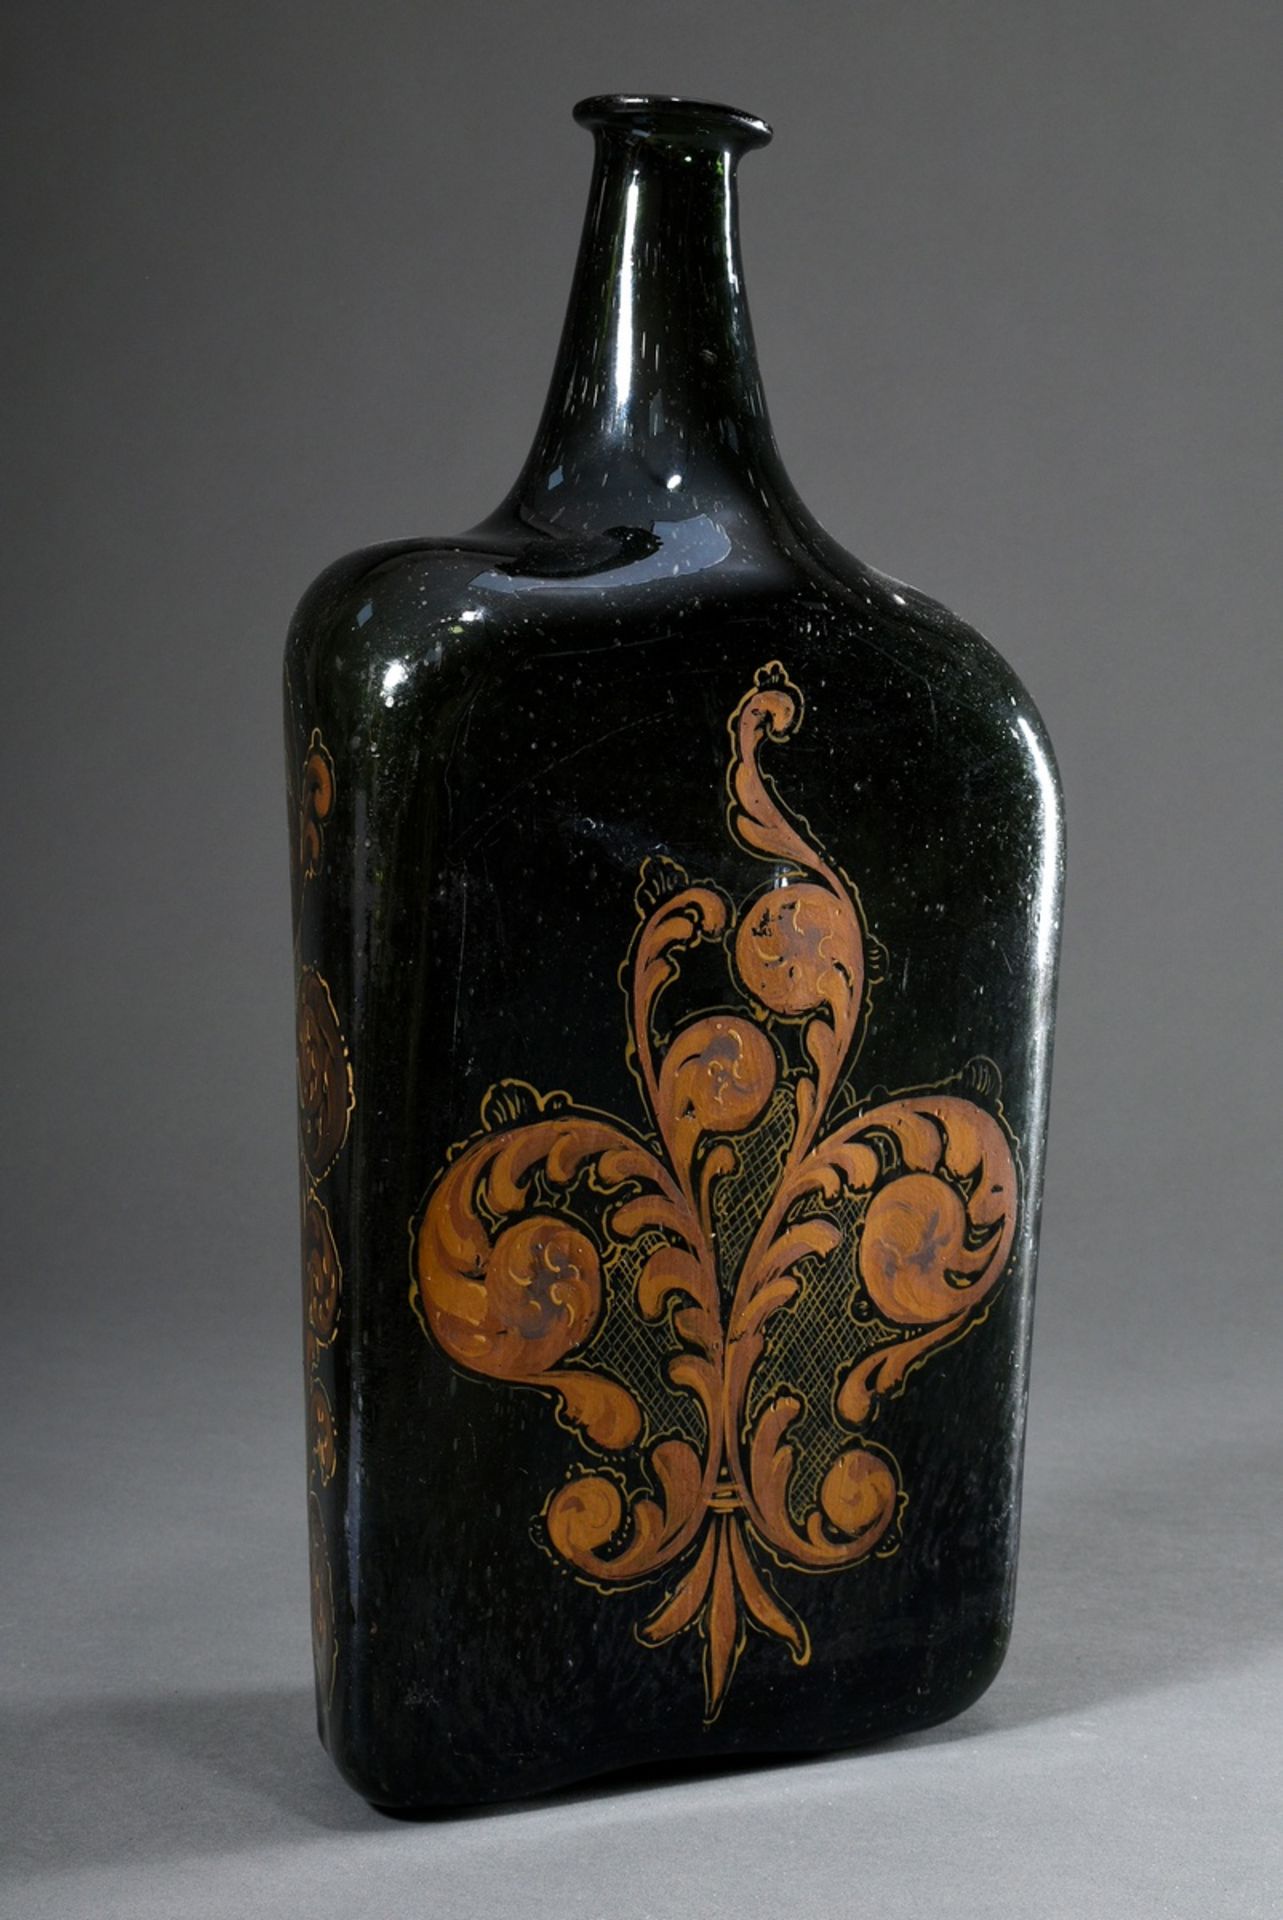 Large forest glass bottle with polychrome painting "Rural scene with cows" in ornamental cartouche  - Image 2 of 7